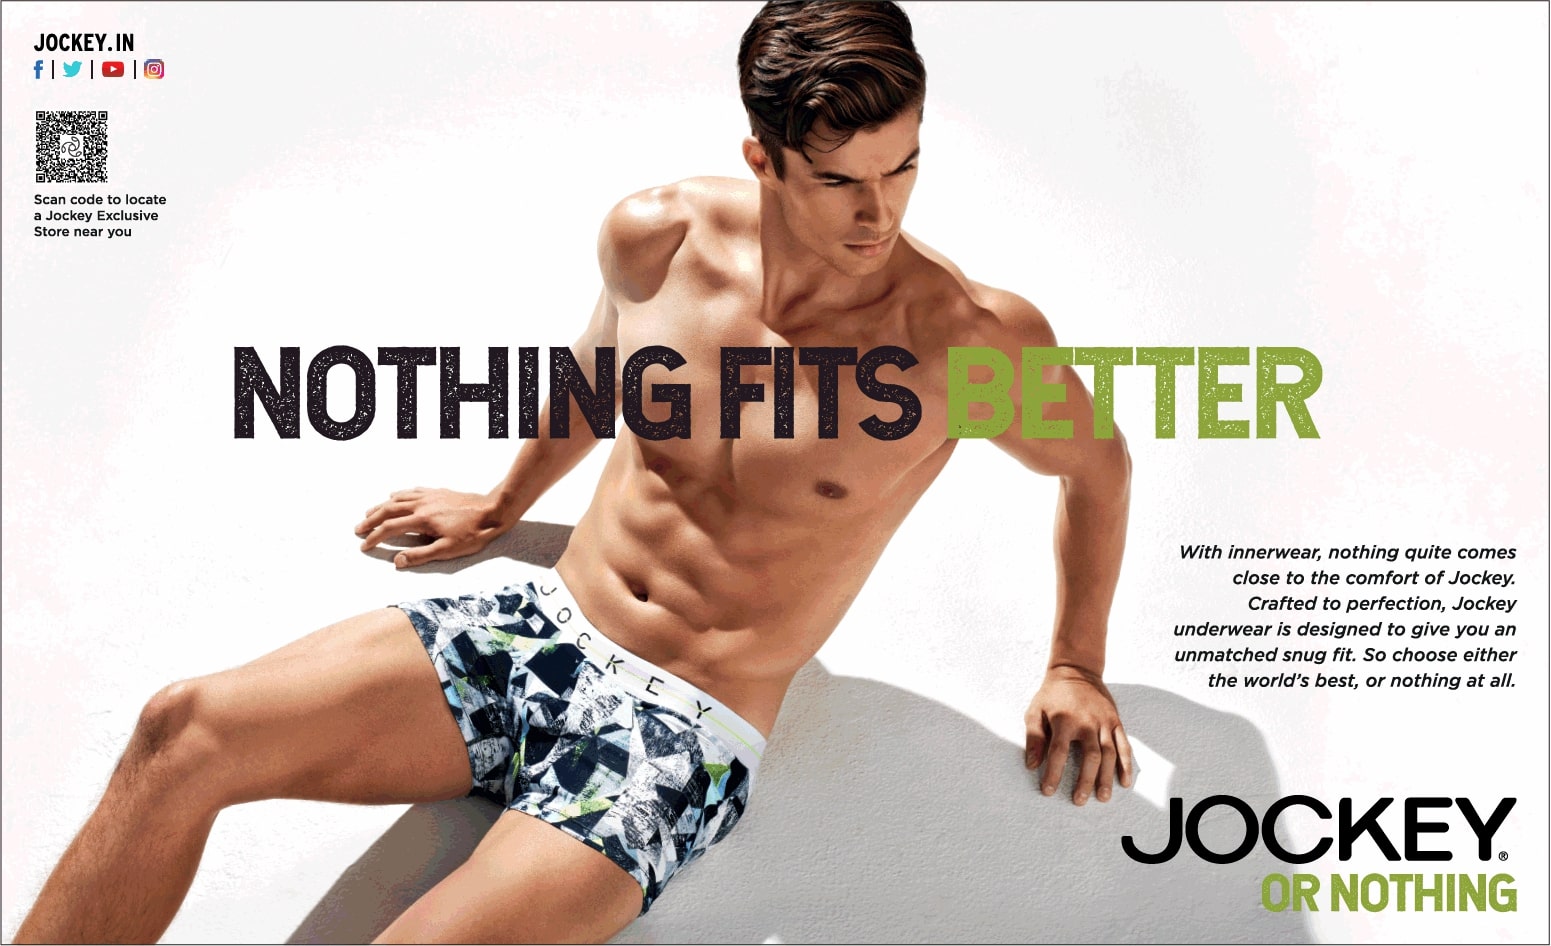 jockey-or-nothing-nothing-fits-better-ad-bangalore-times-08-04-2021